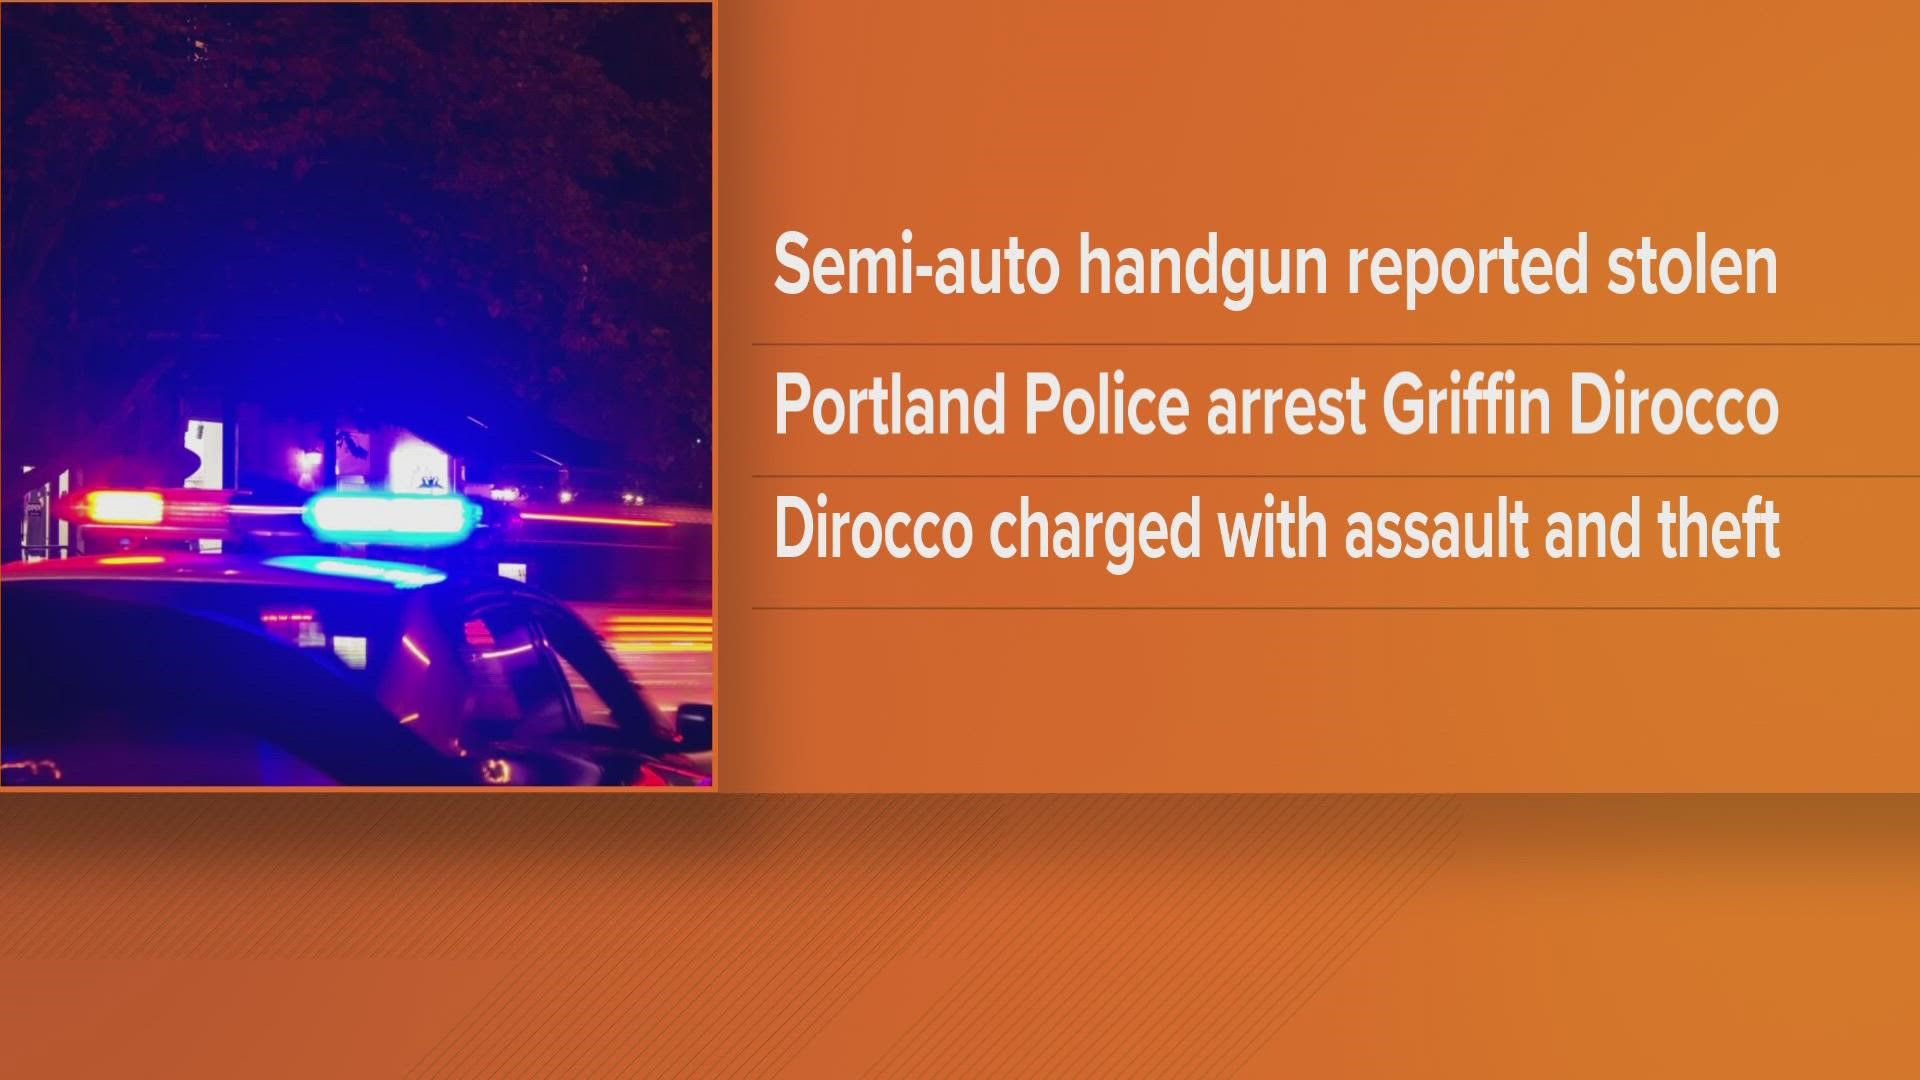 Portland police officers arrested Griffin Dirocco early Sunday after allegedly threatening staff members at Rick's Cabaret with a stolen semi-automatic handgun.